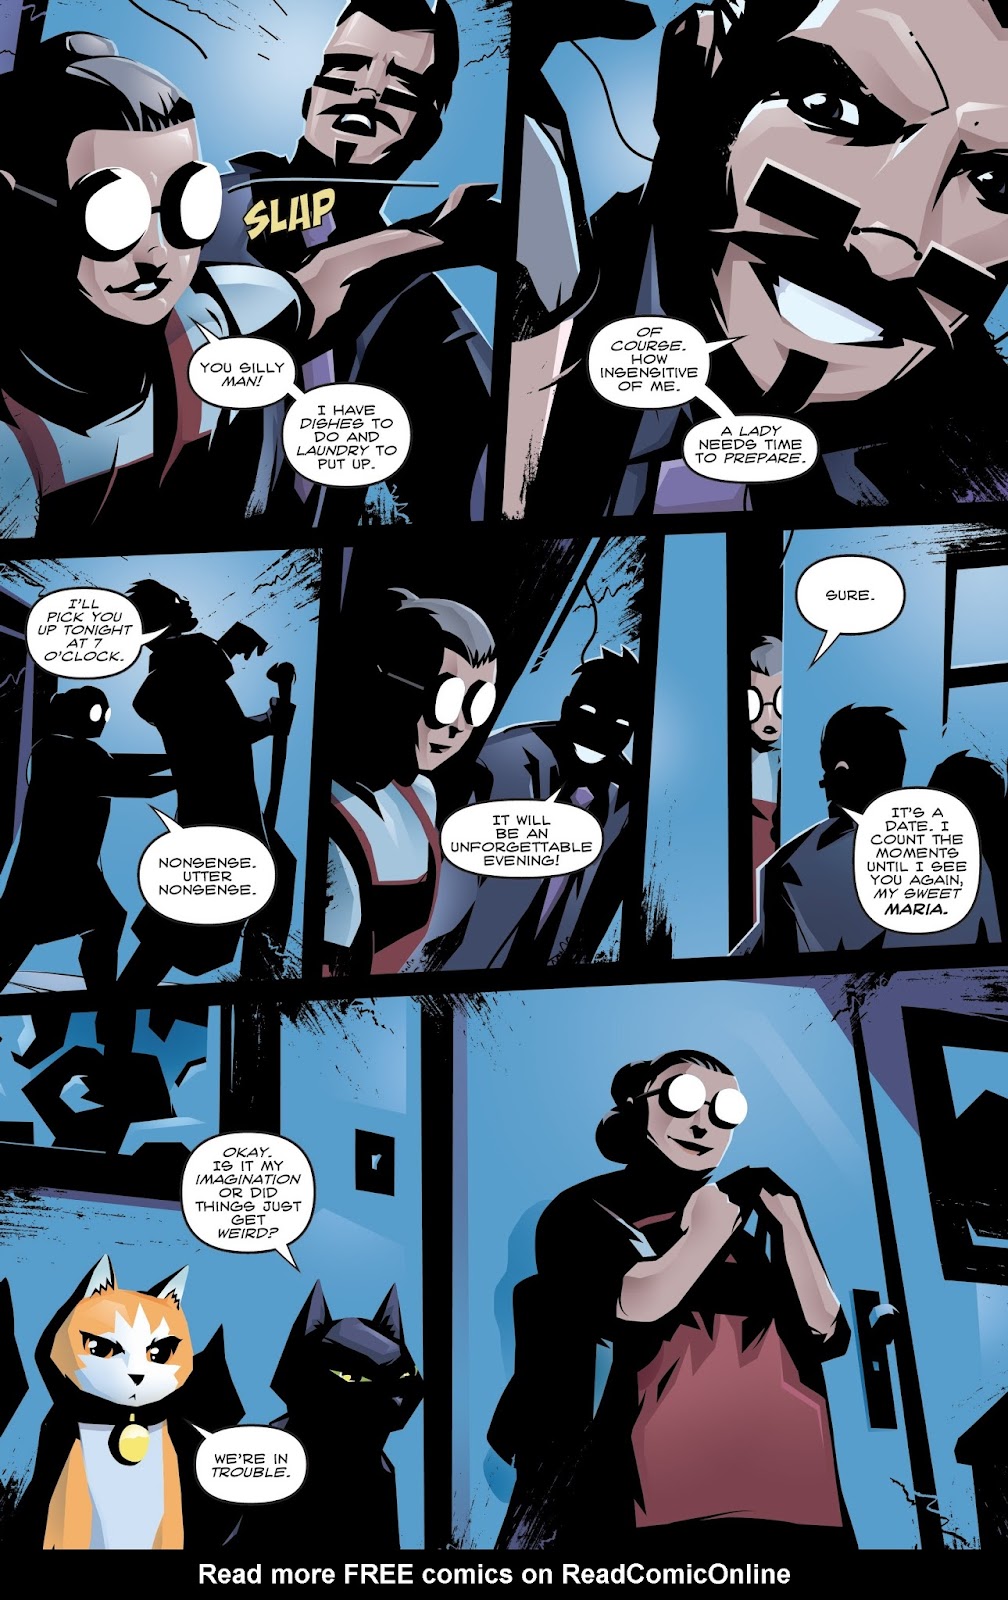 Hero Cats: Midnight Over Stellar City Vol. 2 issue 2 - Page 6